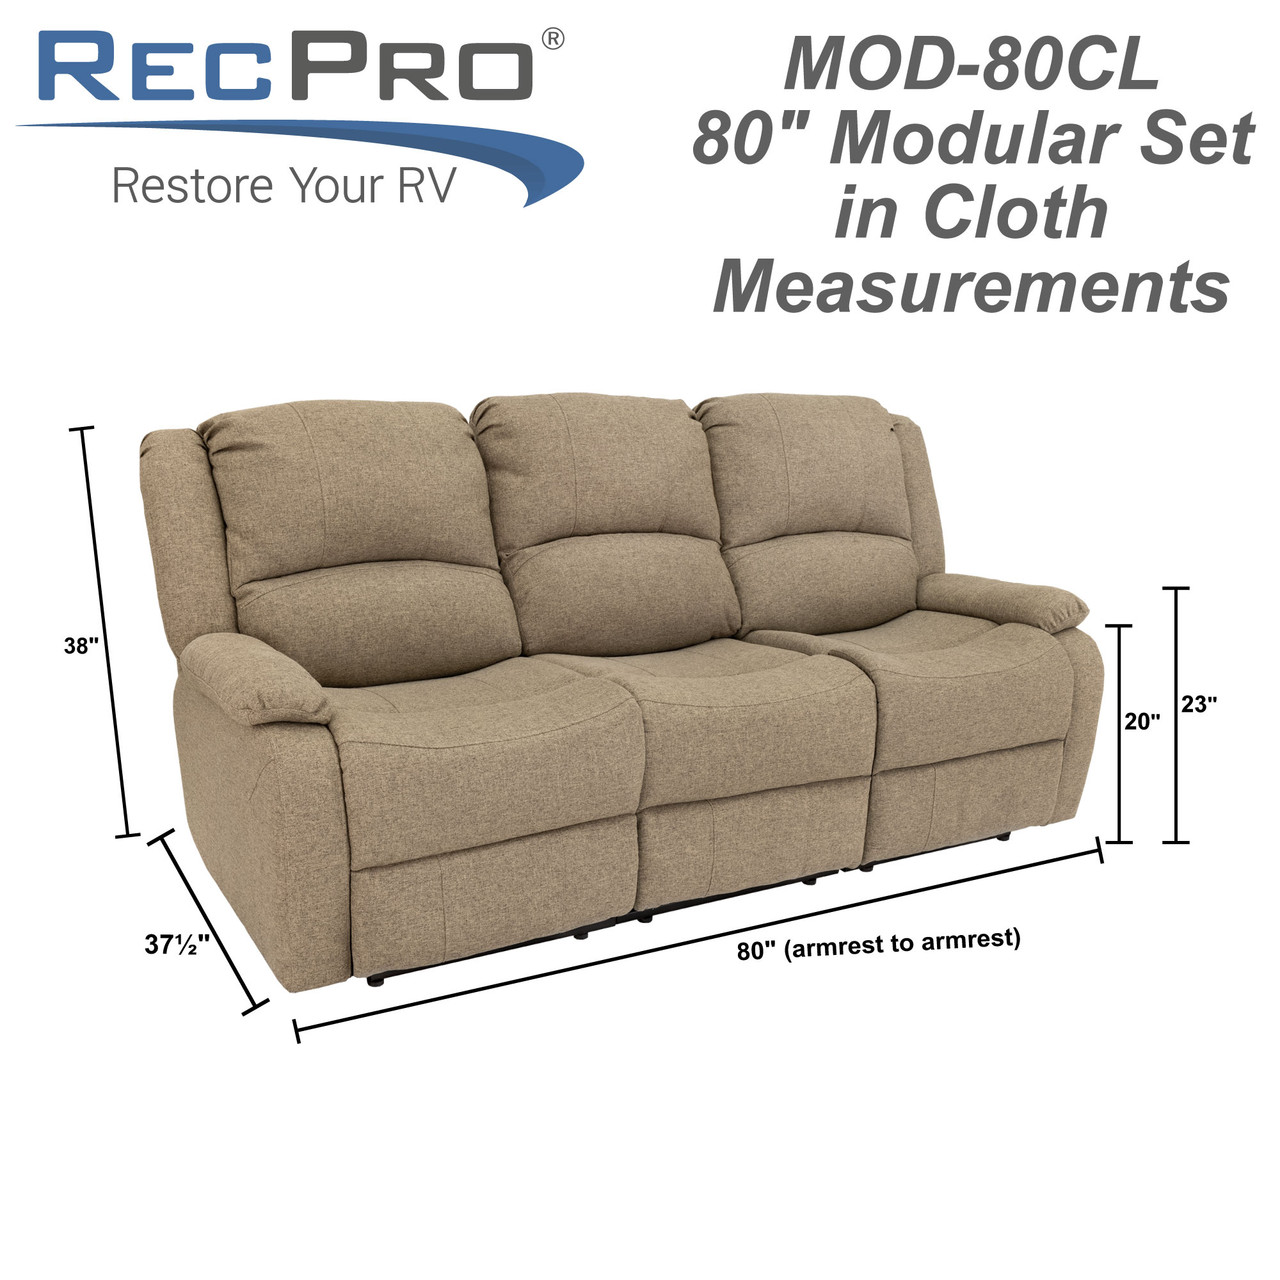 Sofa Sectional Couch Connector Bracket - Lazy Boy Recliner